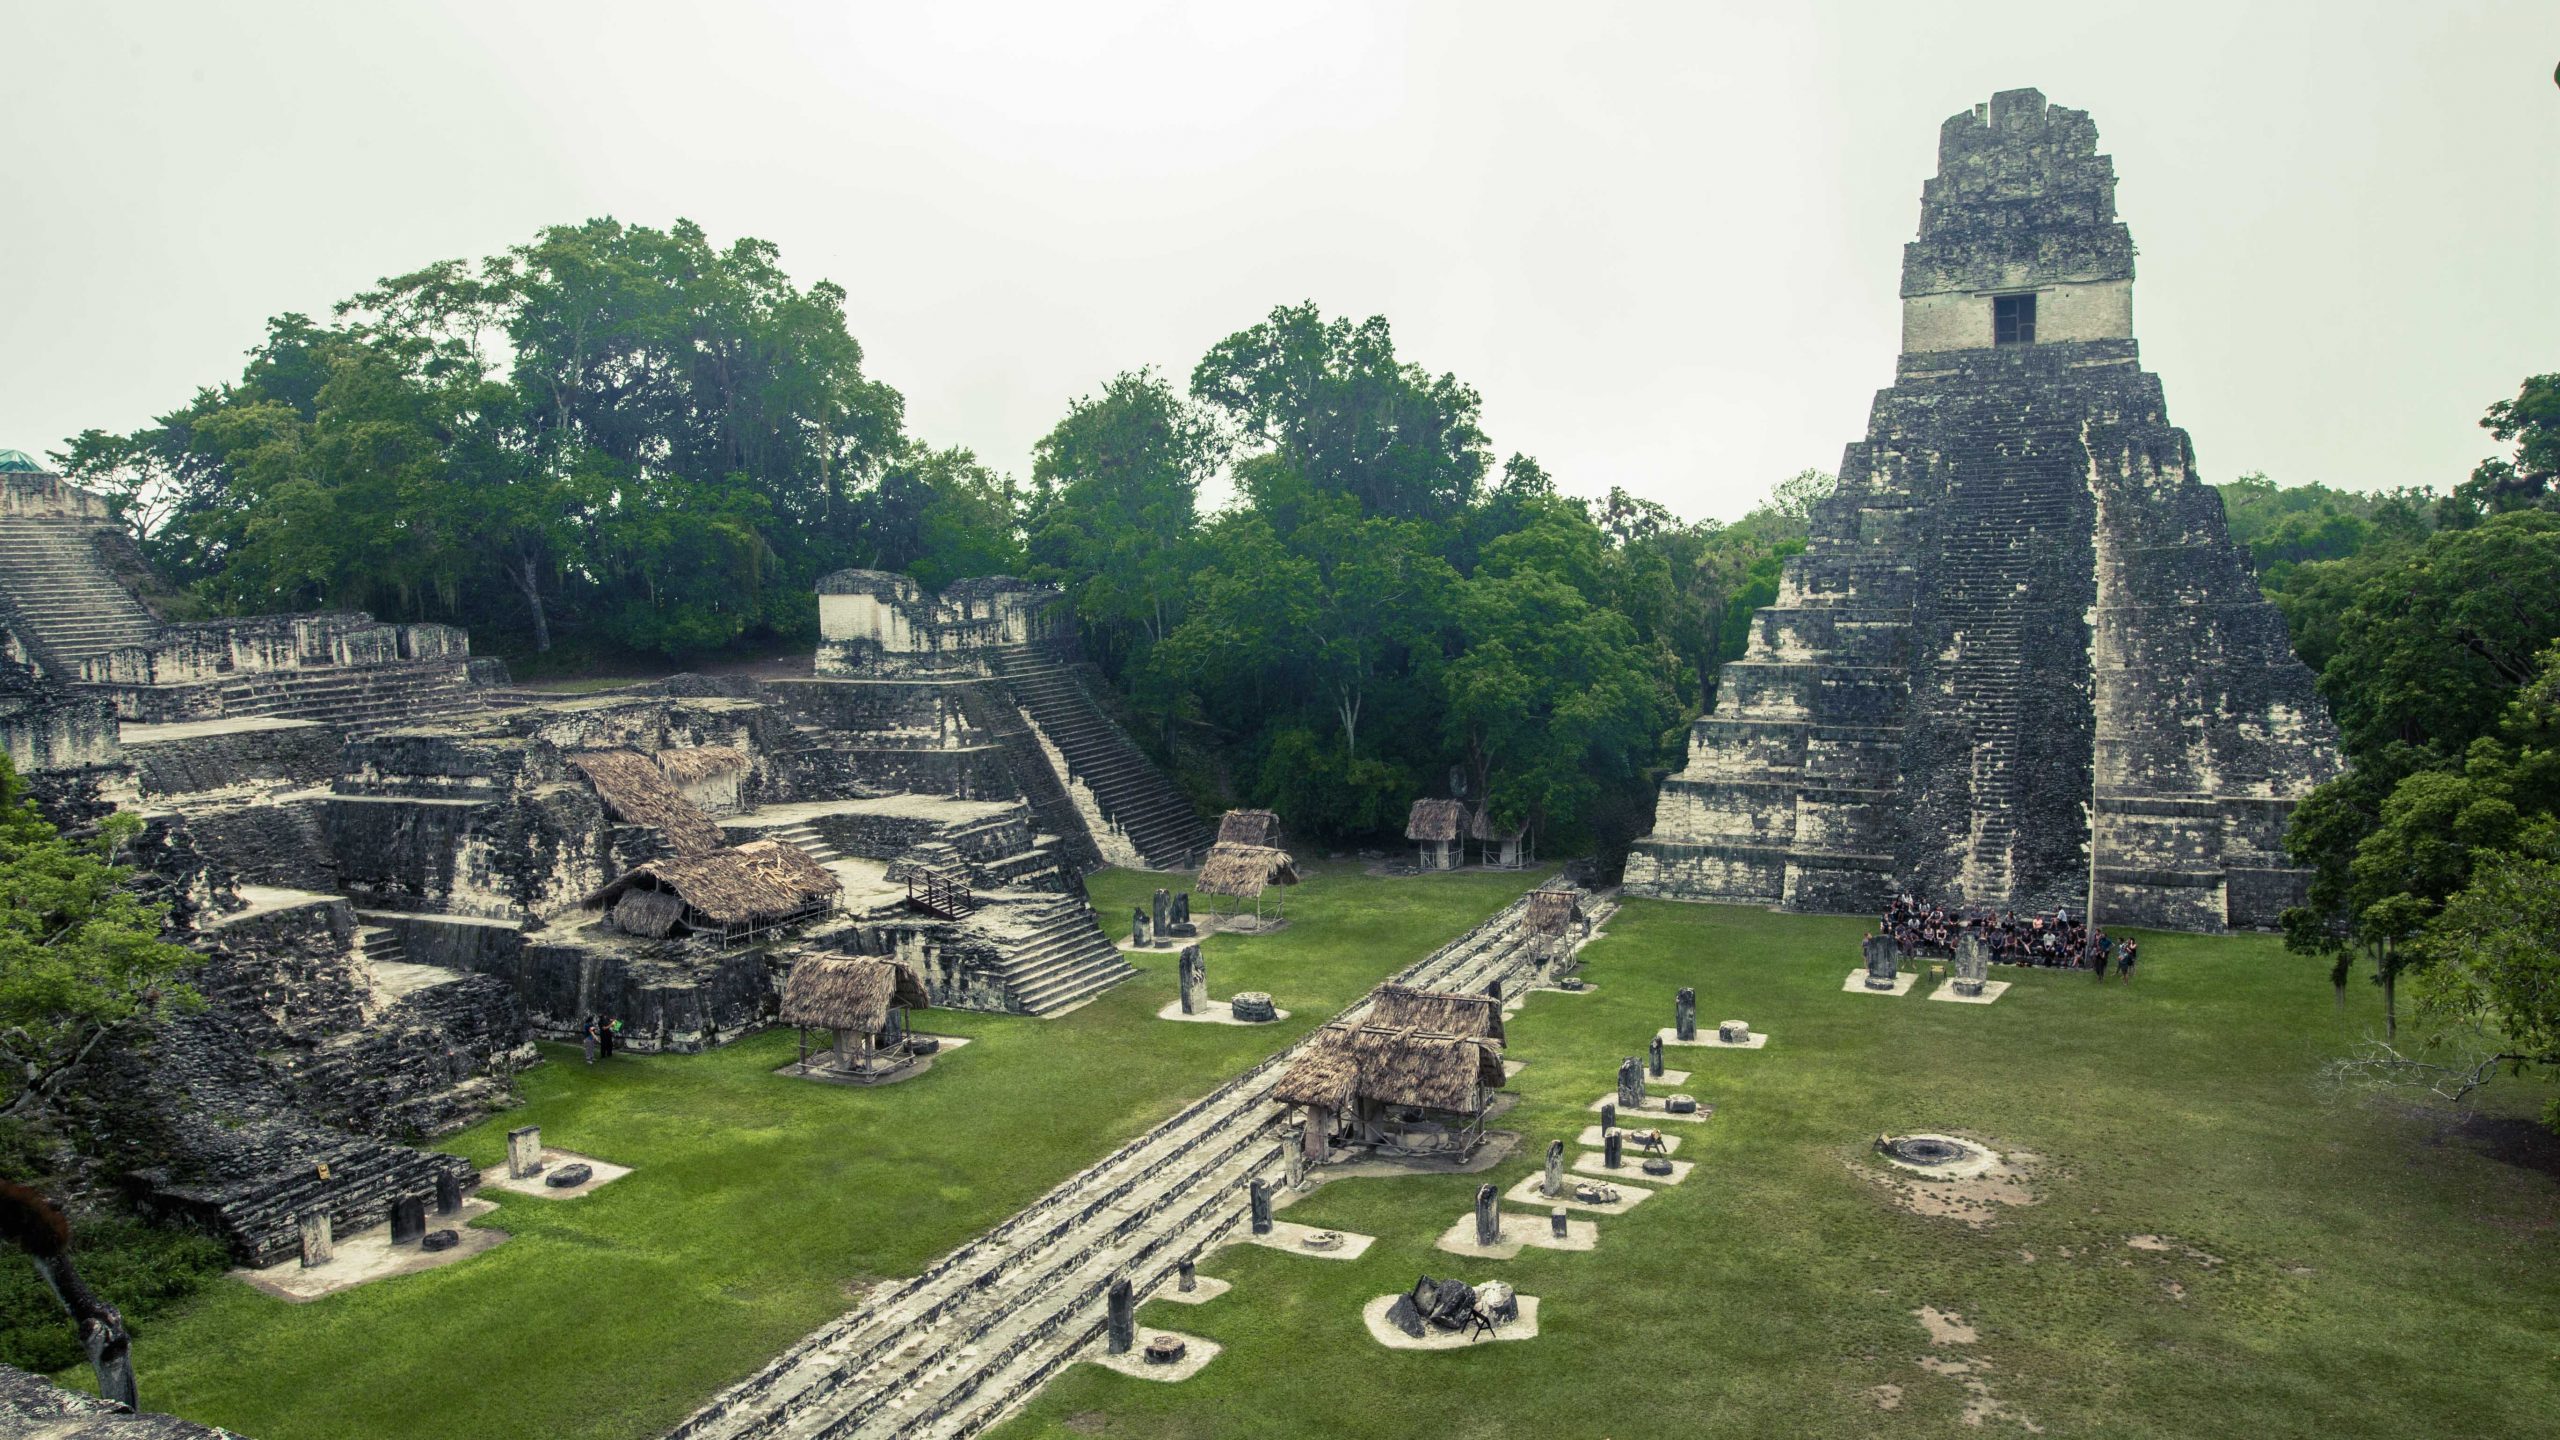 Why Did the Mayans Trade Animals 3000 Years Ago? | History of Yesterday